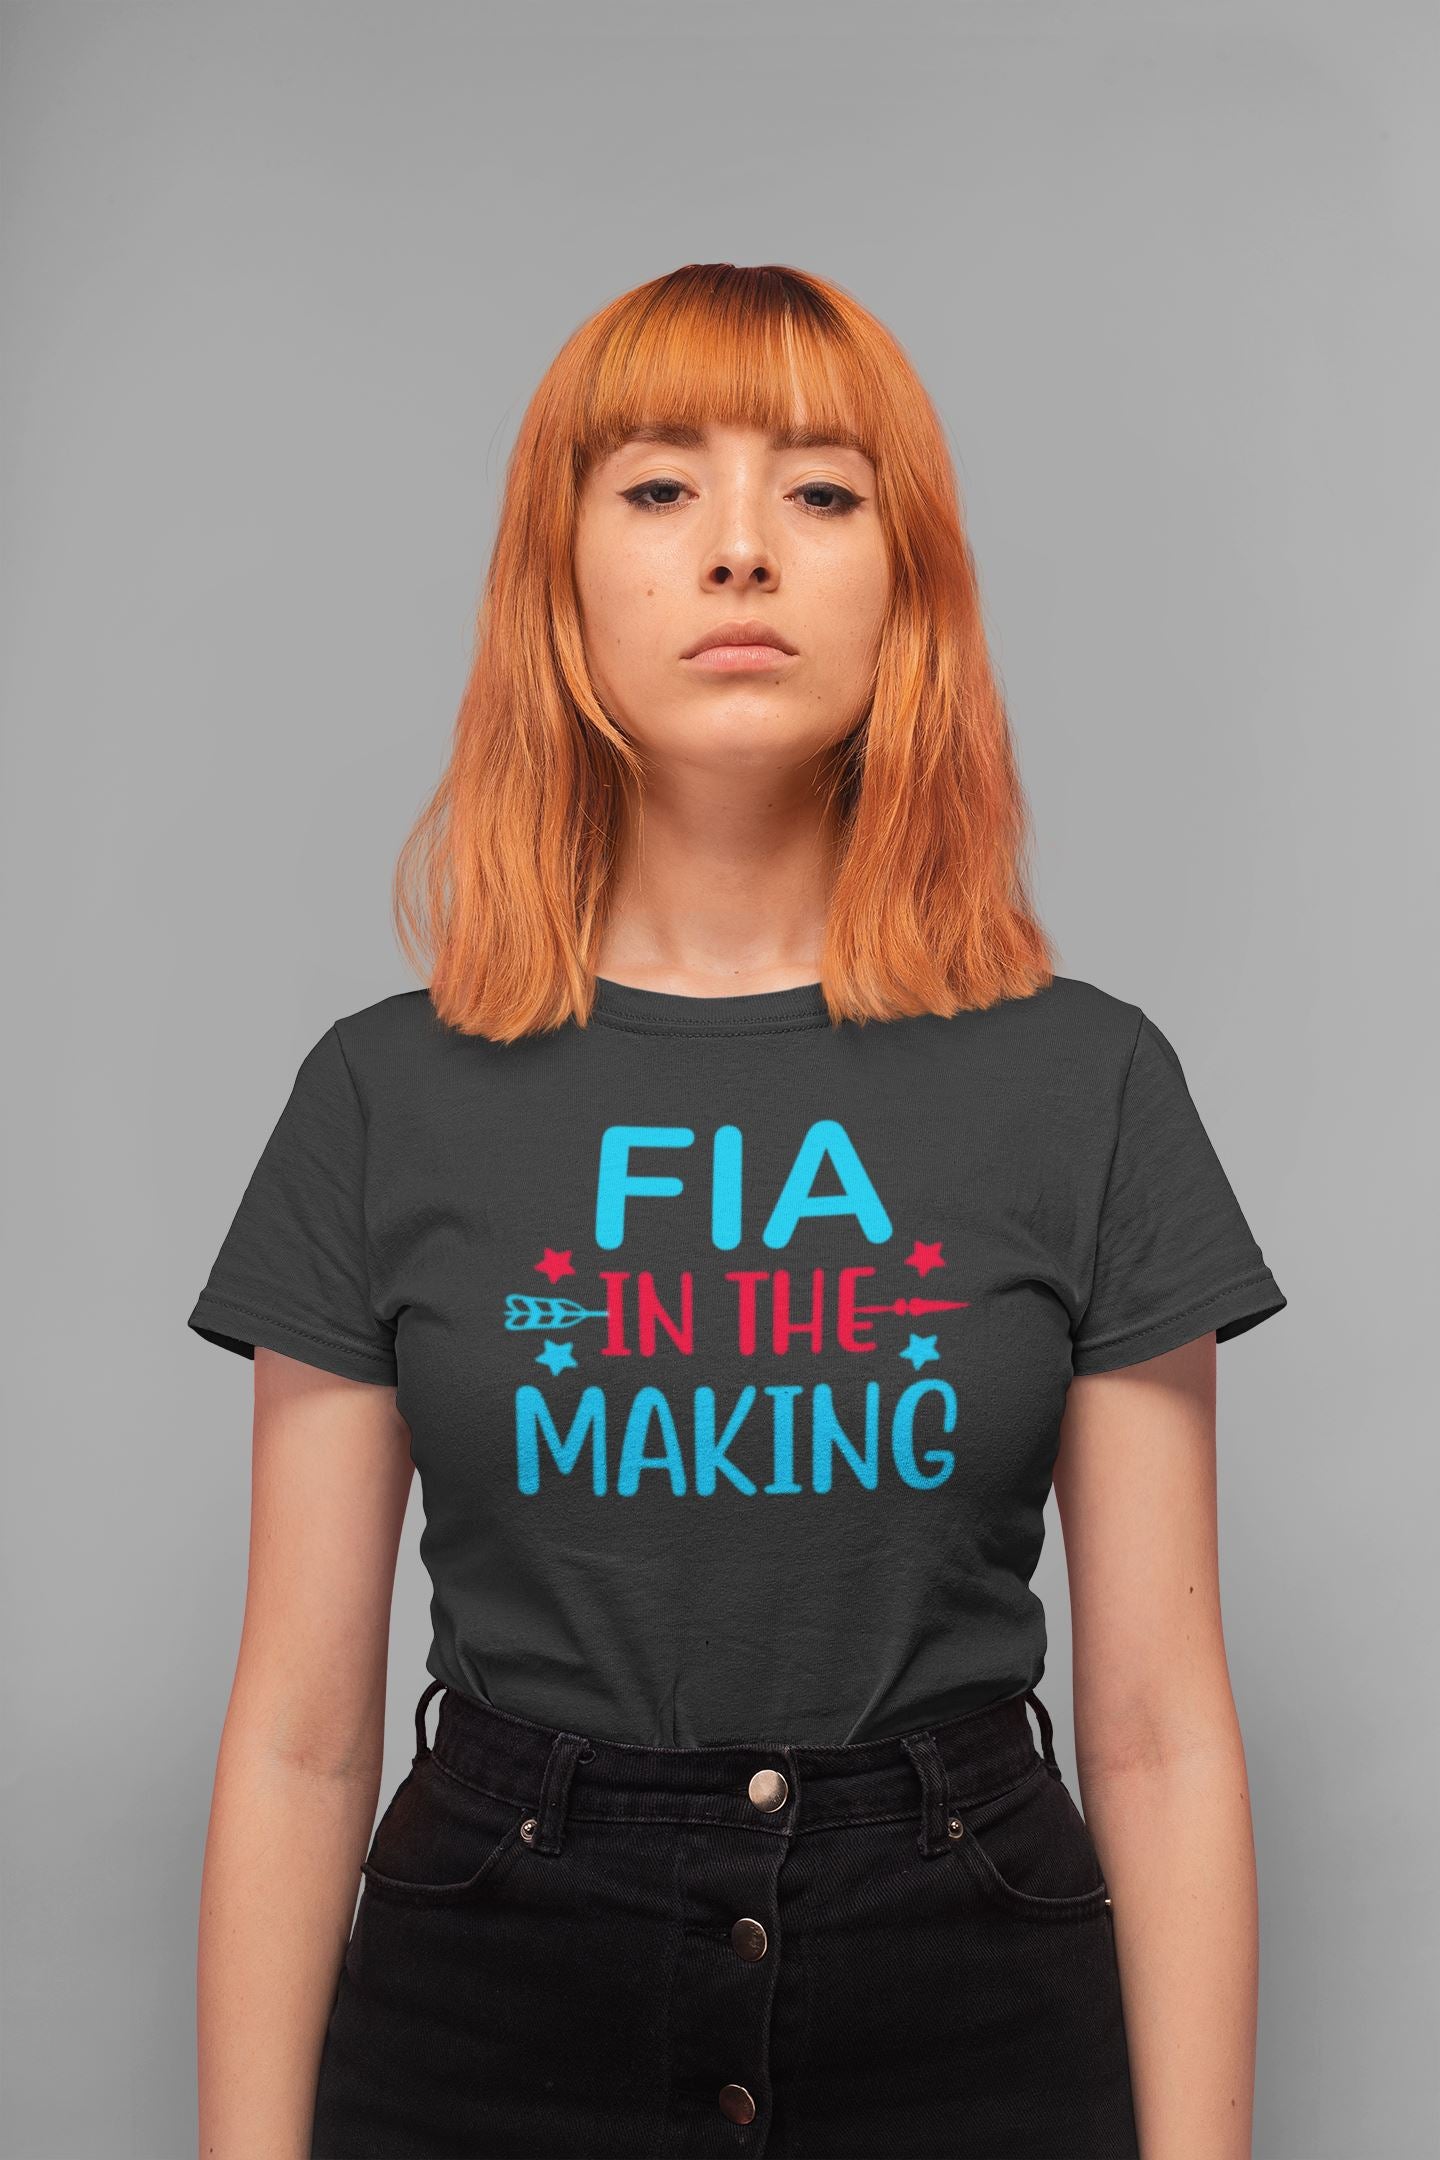 Fia in the Making Exclusive Black T Shirt for Women freeshipping - Catch My Drift India